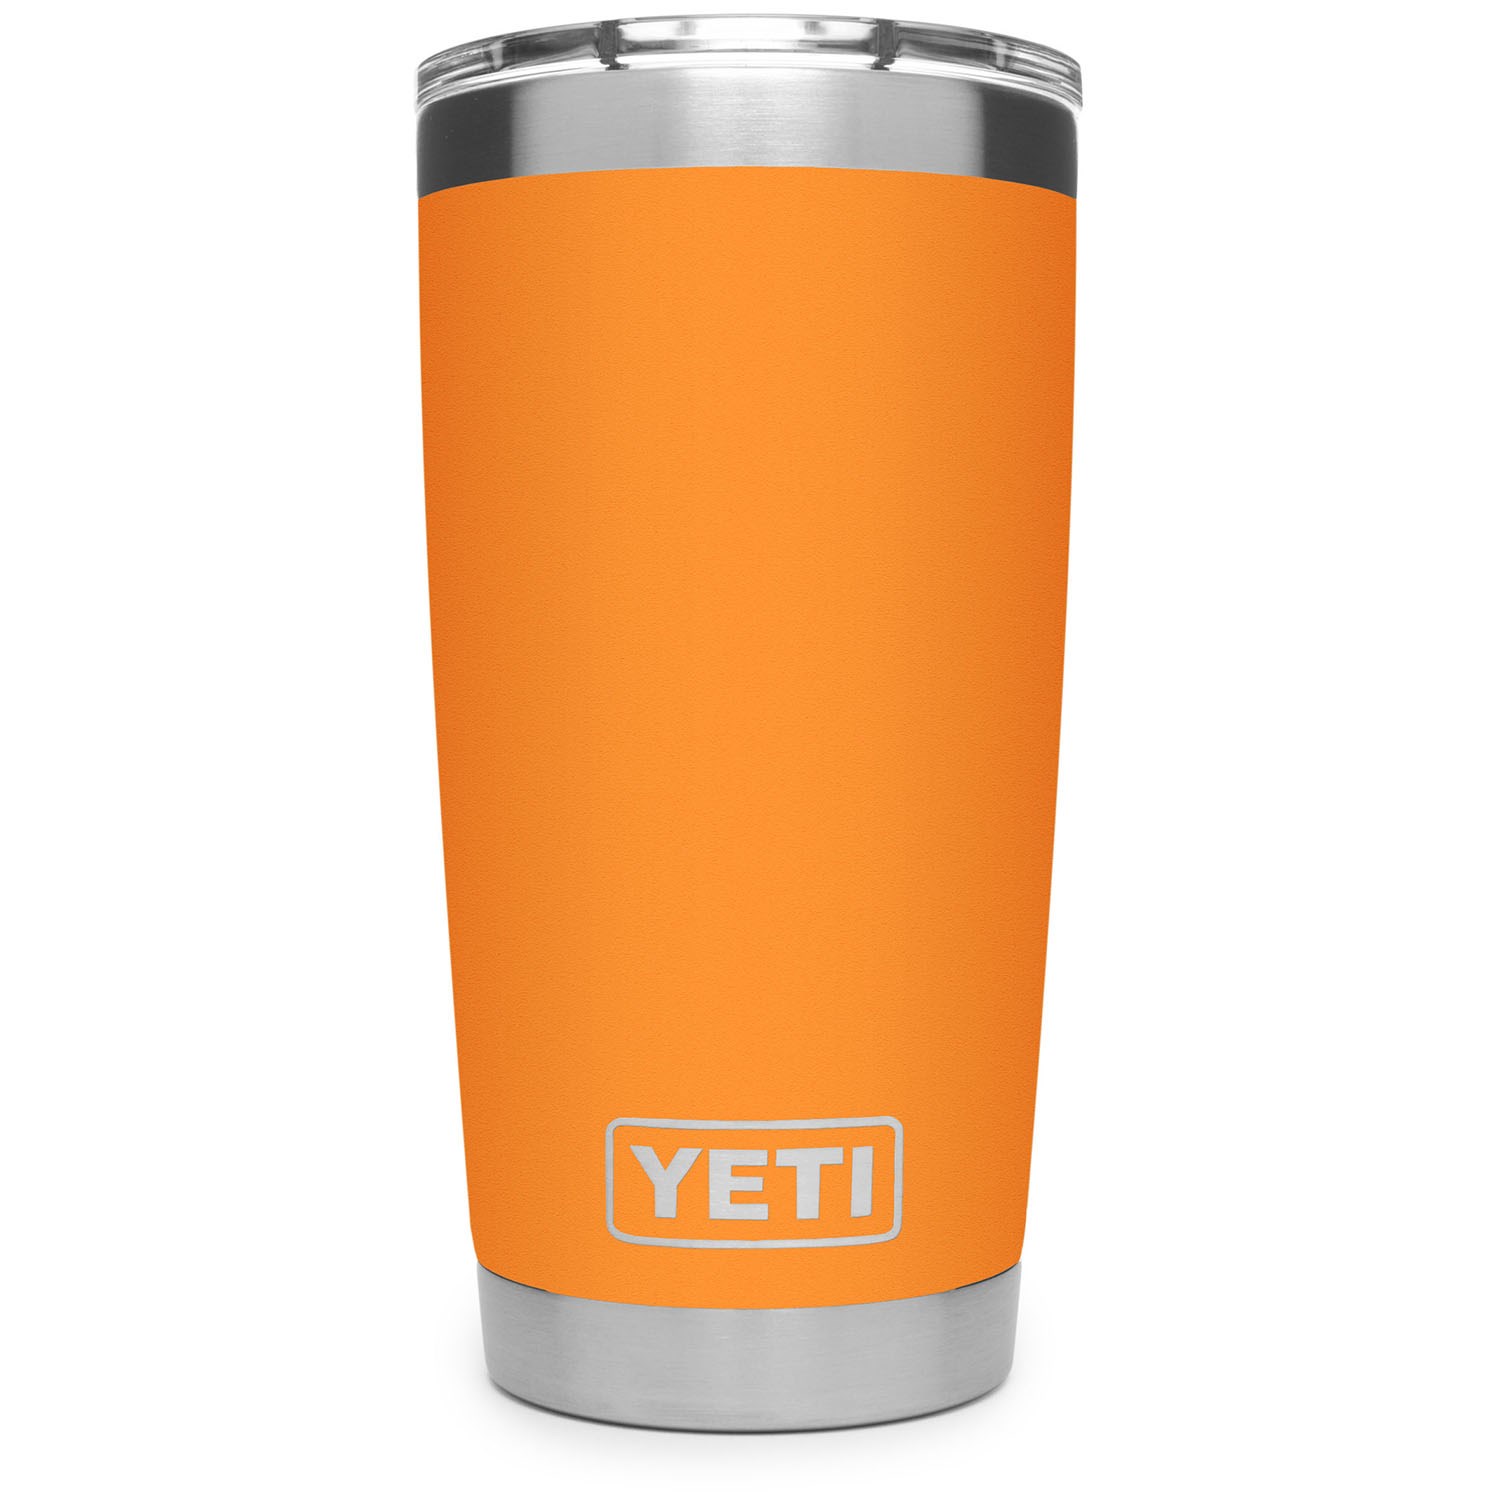 Yeti Top Question! I buying buying a replacement too magnetic slider but I  must have purchased the wrong type. Can anyone help me find where I can buy  the correct replacement slider